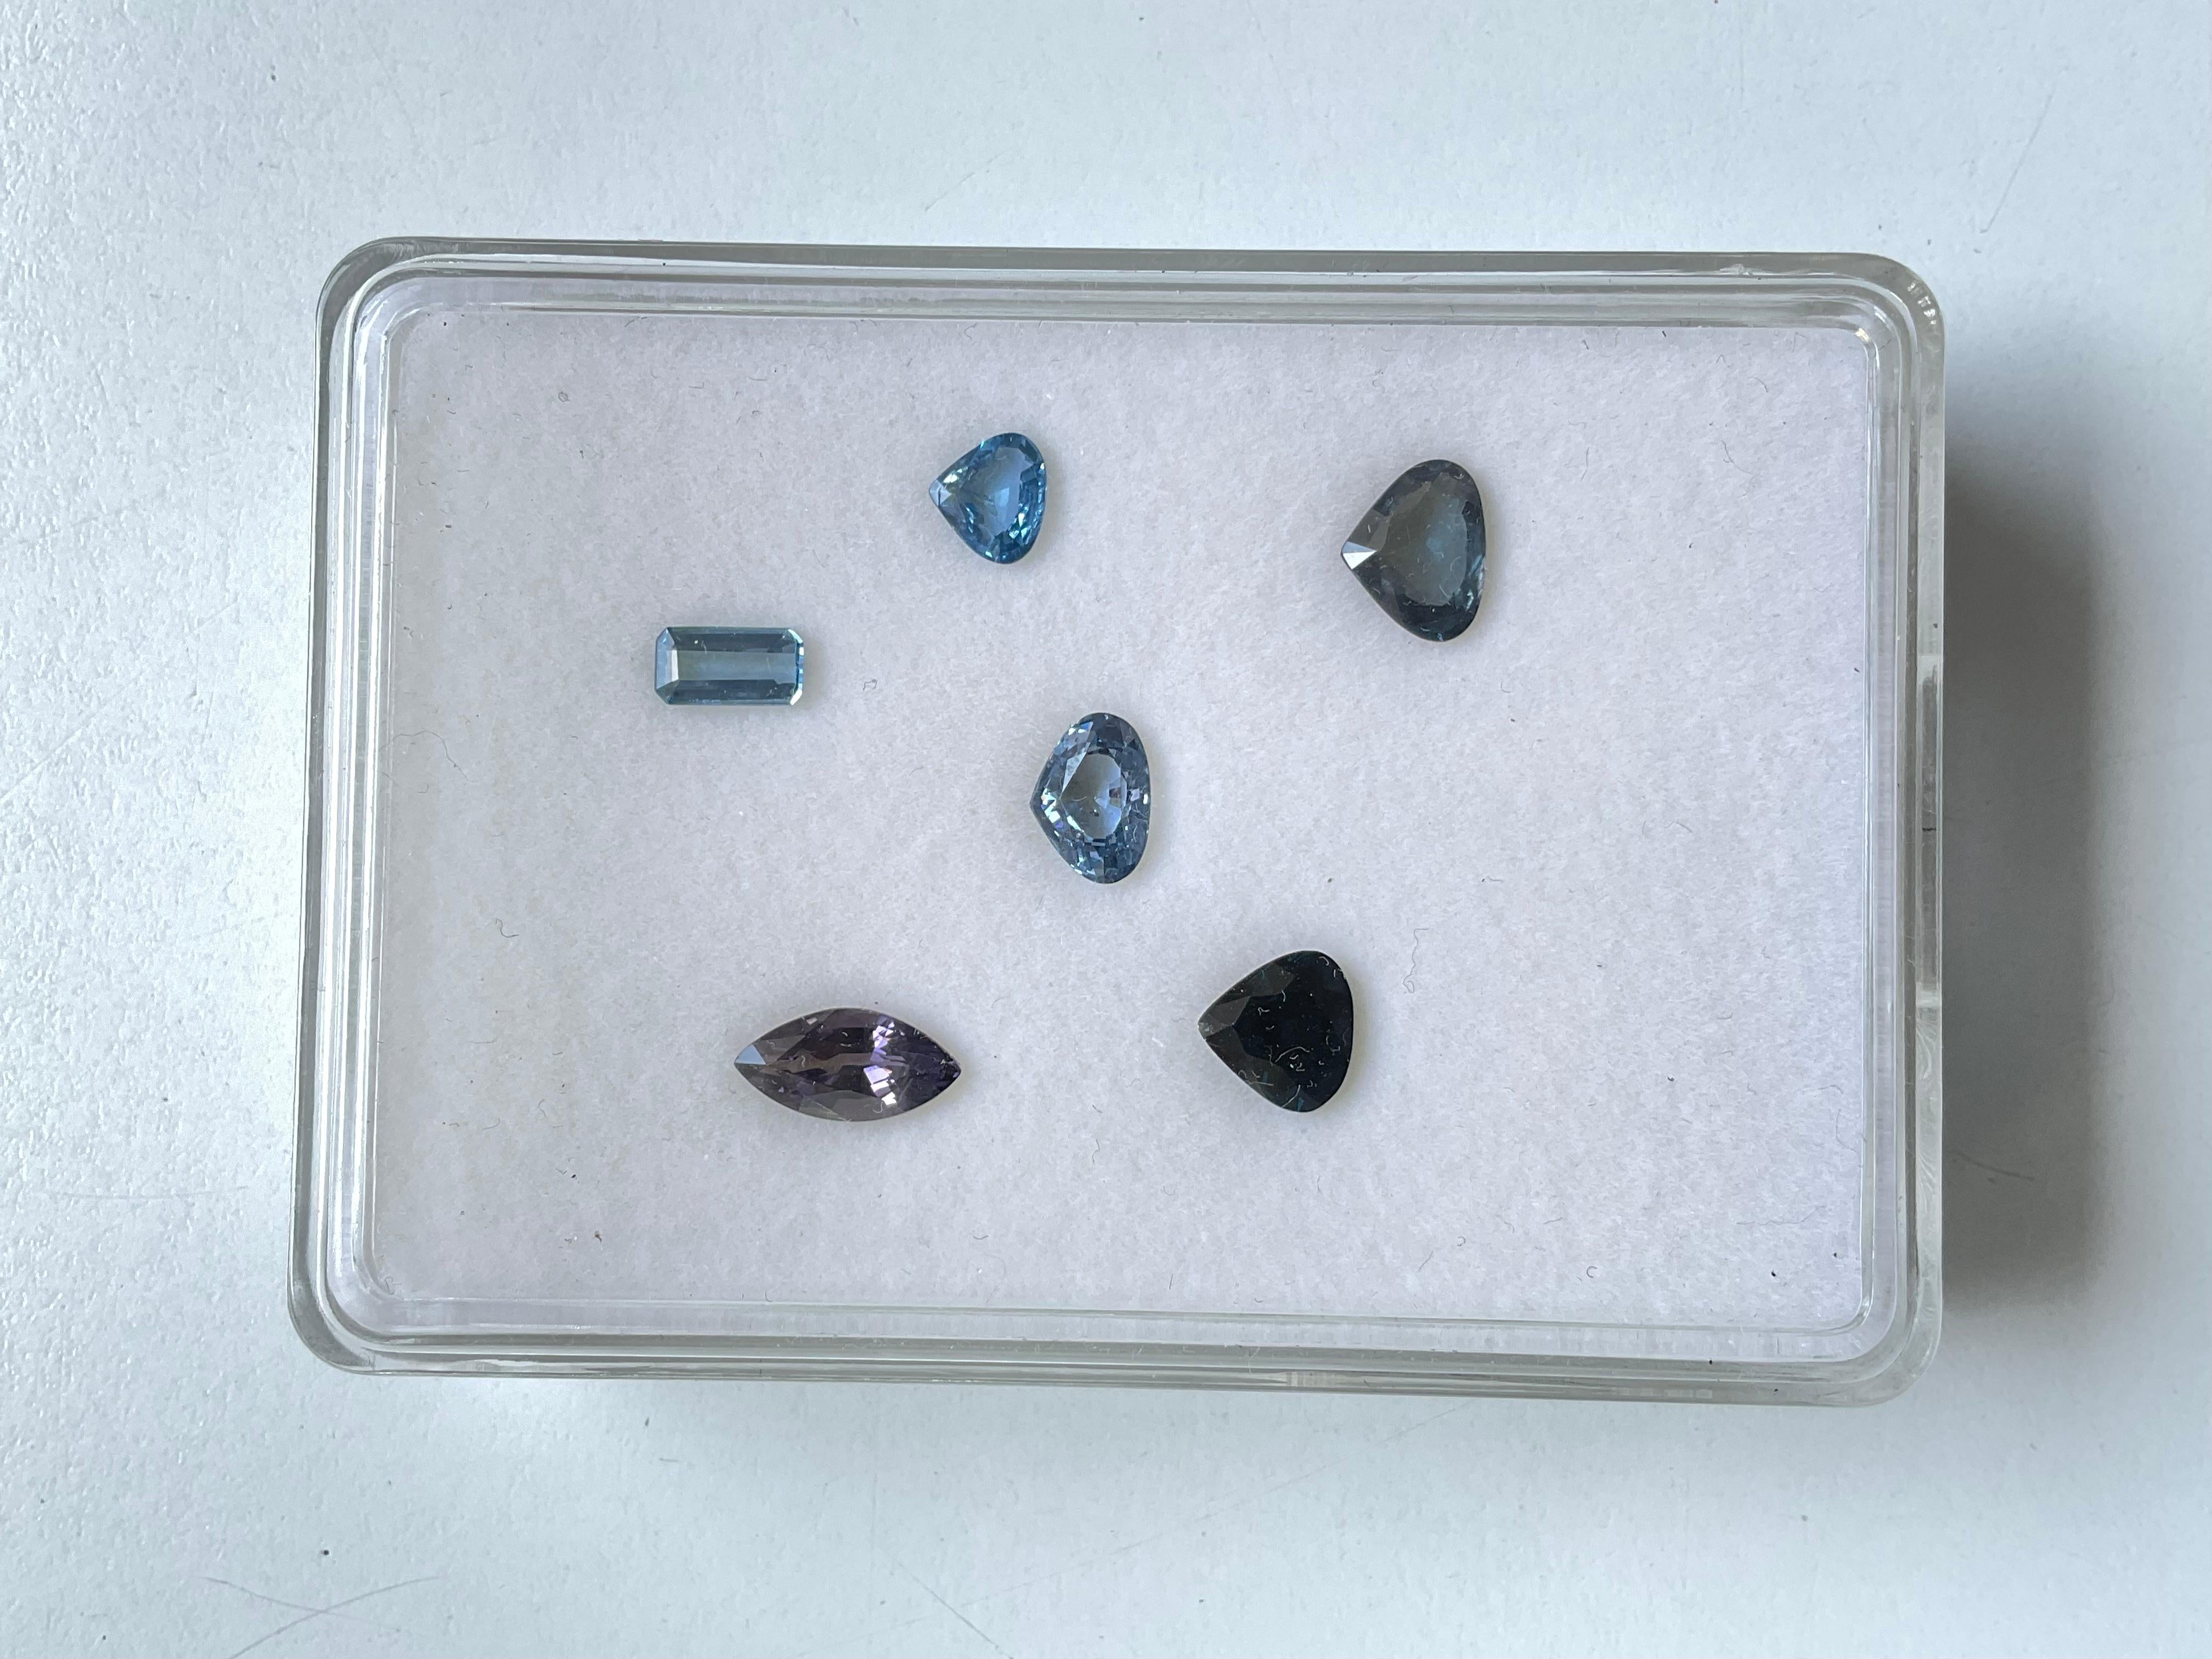 10.47 Carat Grey & Blue Spinel Tanzania Faceted Fancy Cut stone Natural Gemstone For Sale 1